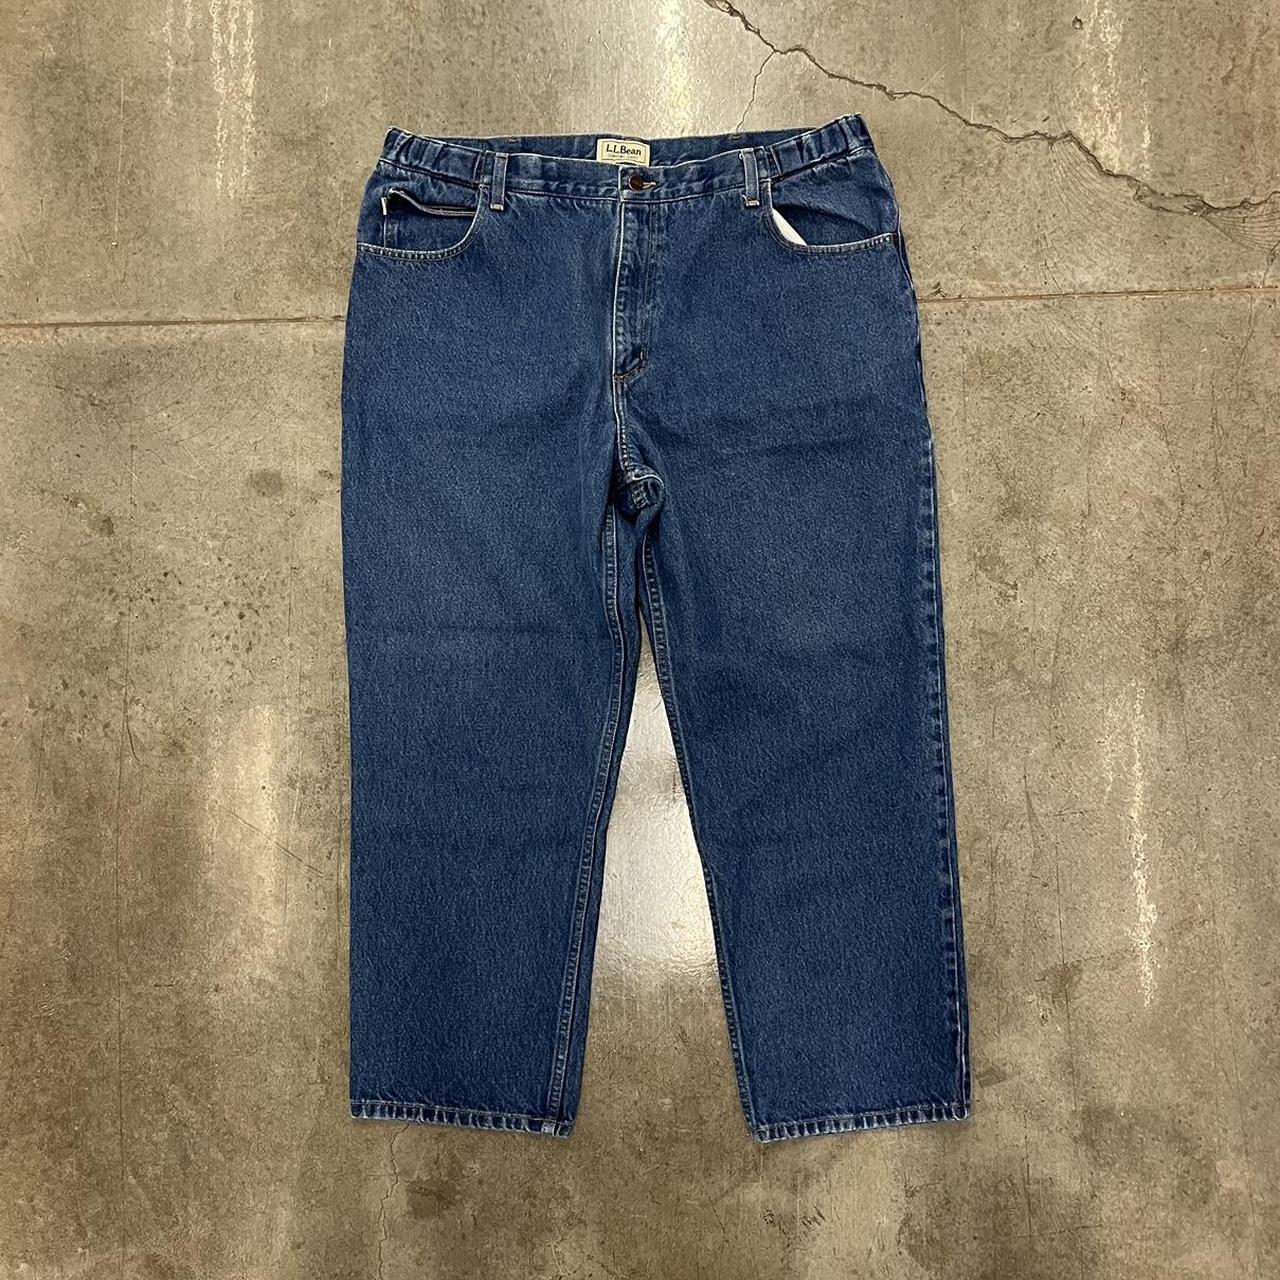 LL Bean denim jeans 40 x 29 No stains or rips almost... - Depop